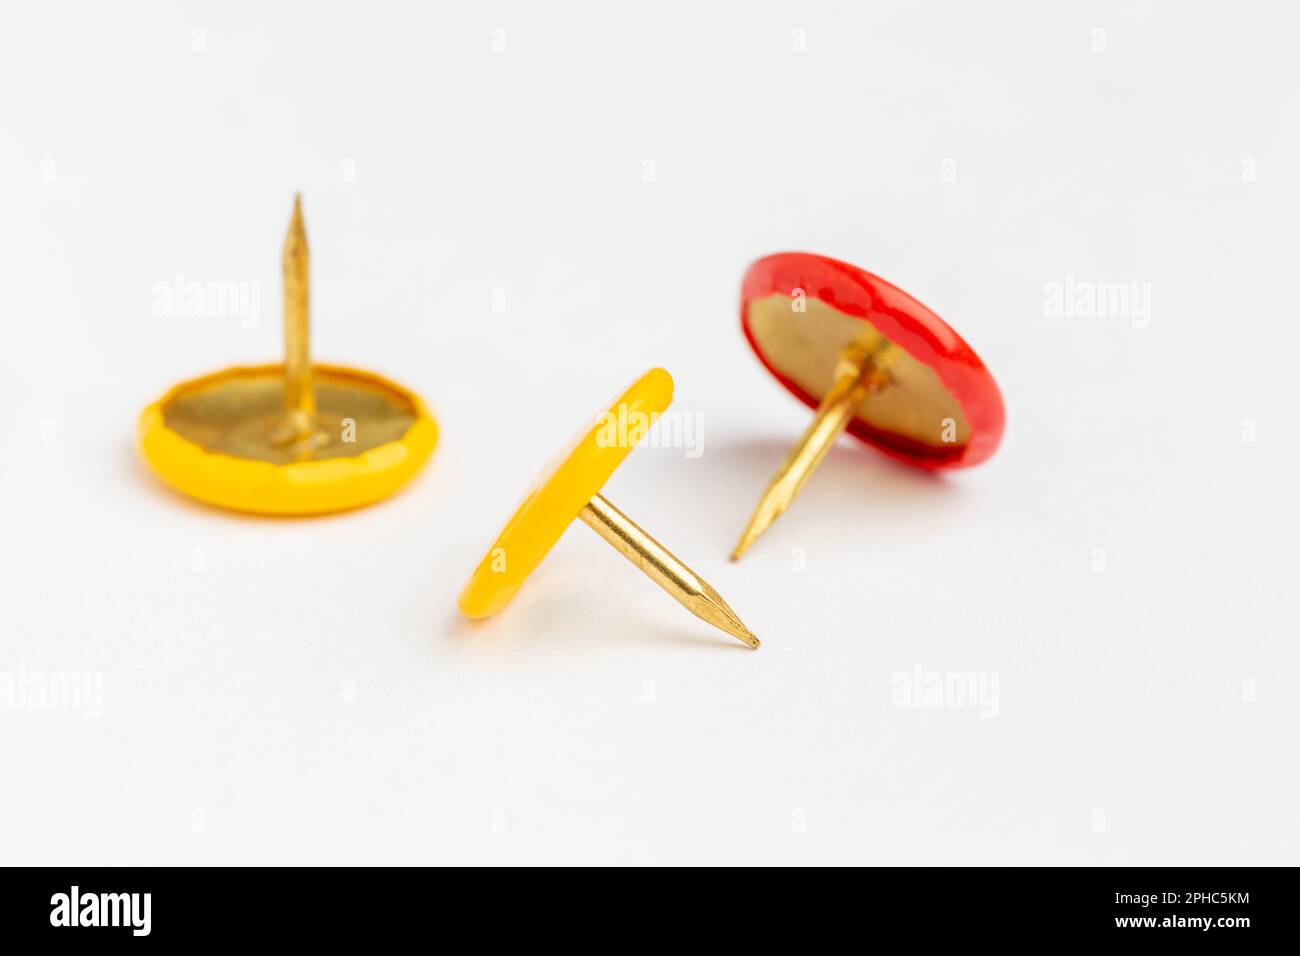 Three drawing pins on a white background. Stock Photo